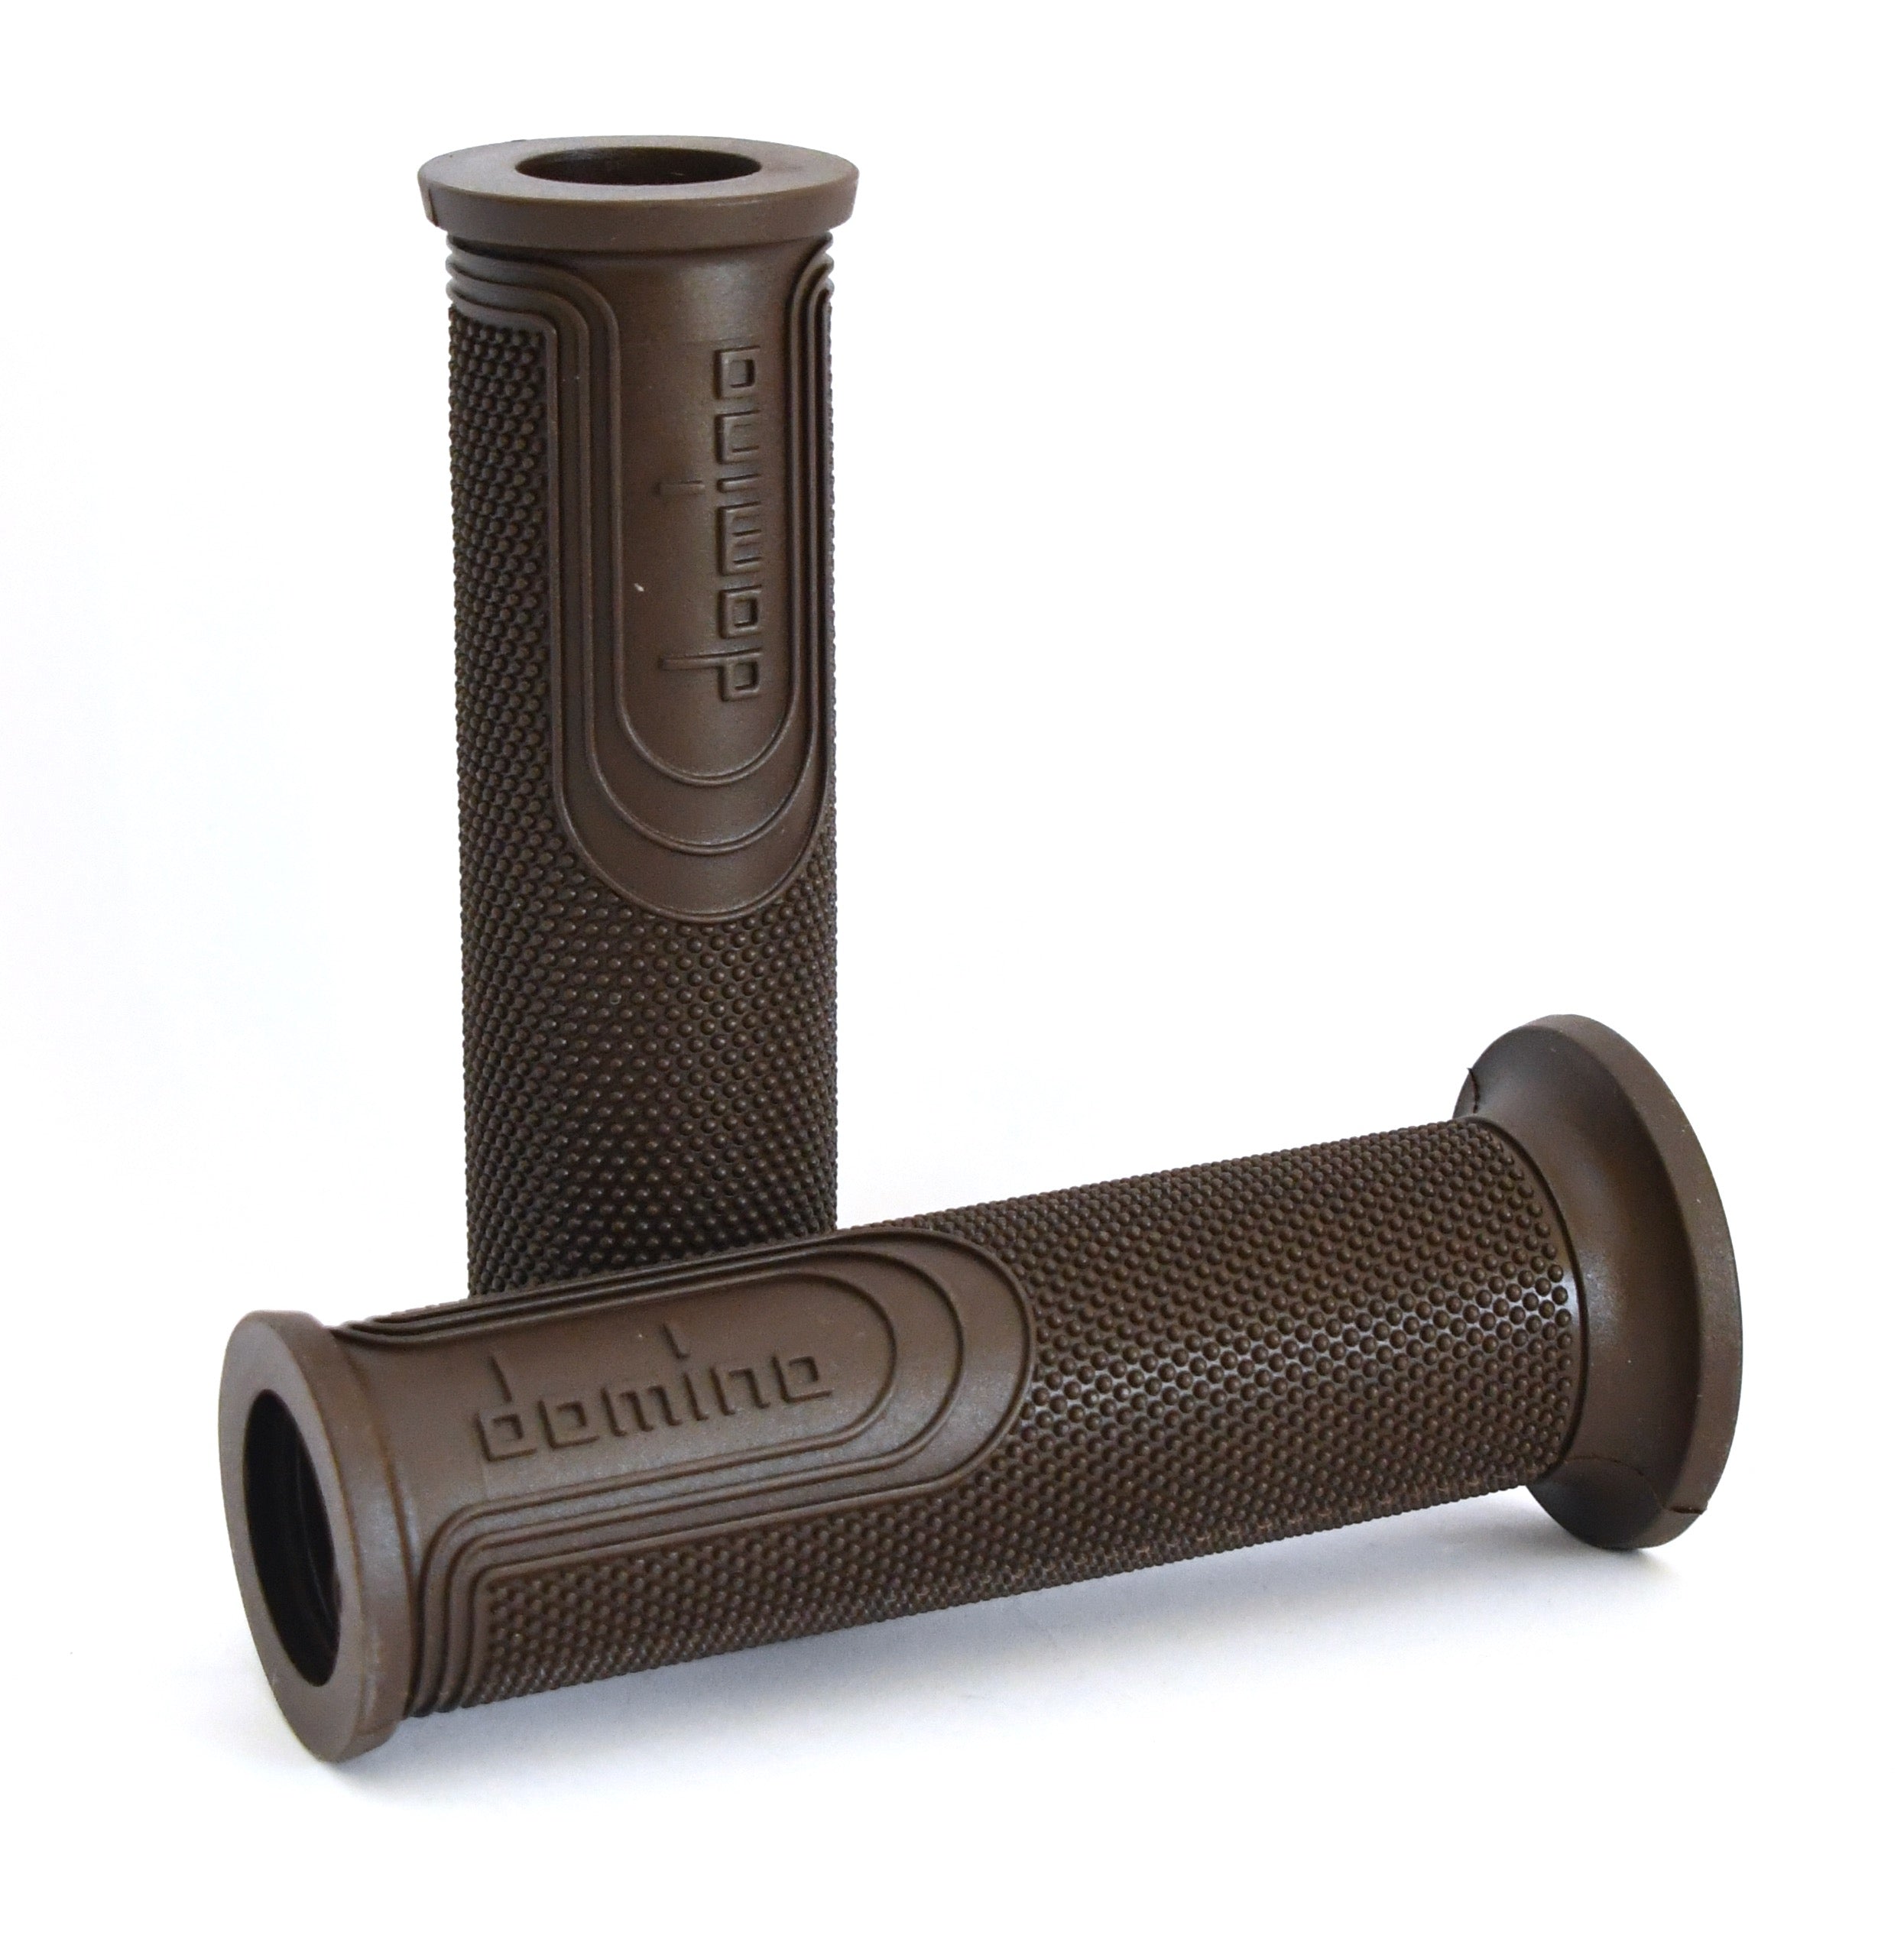 Domino Stradale Black Road Grips with Open Ends 6274.82.40